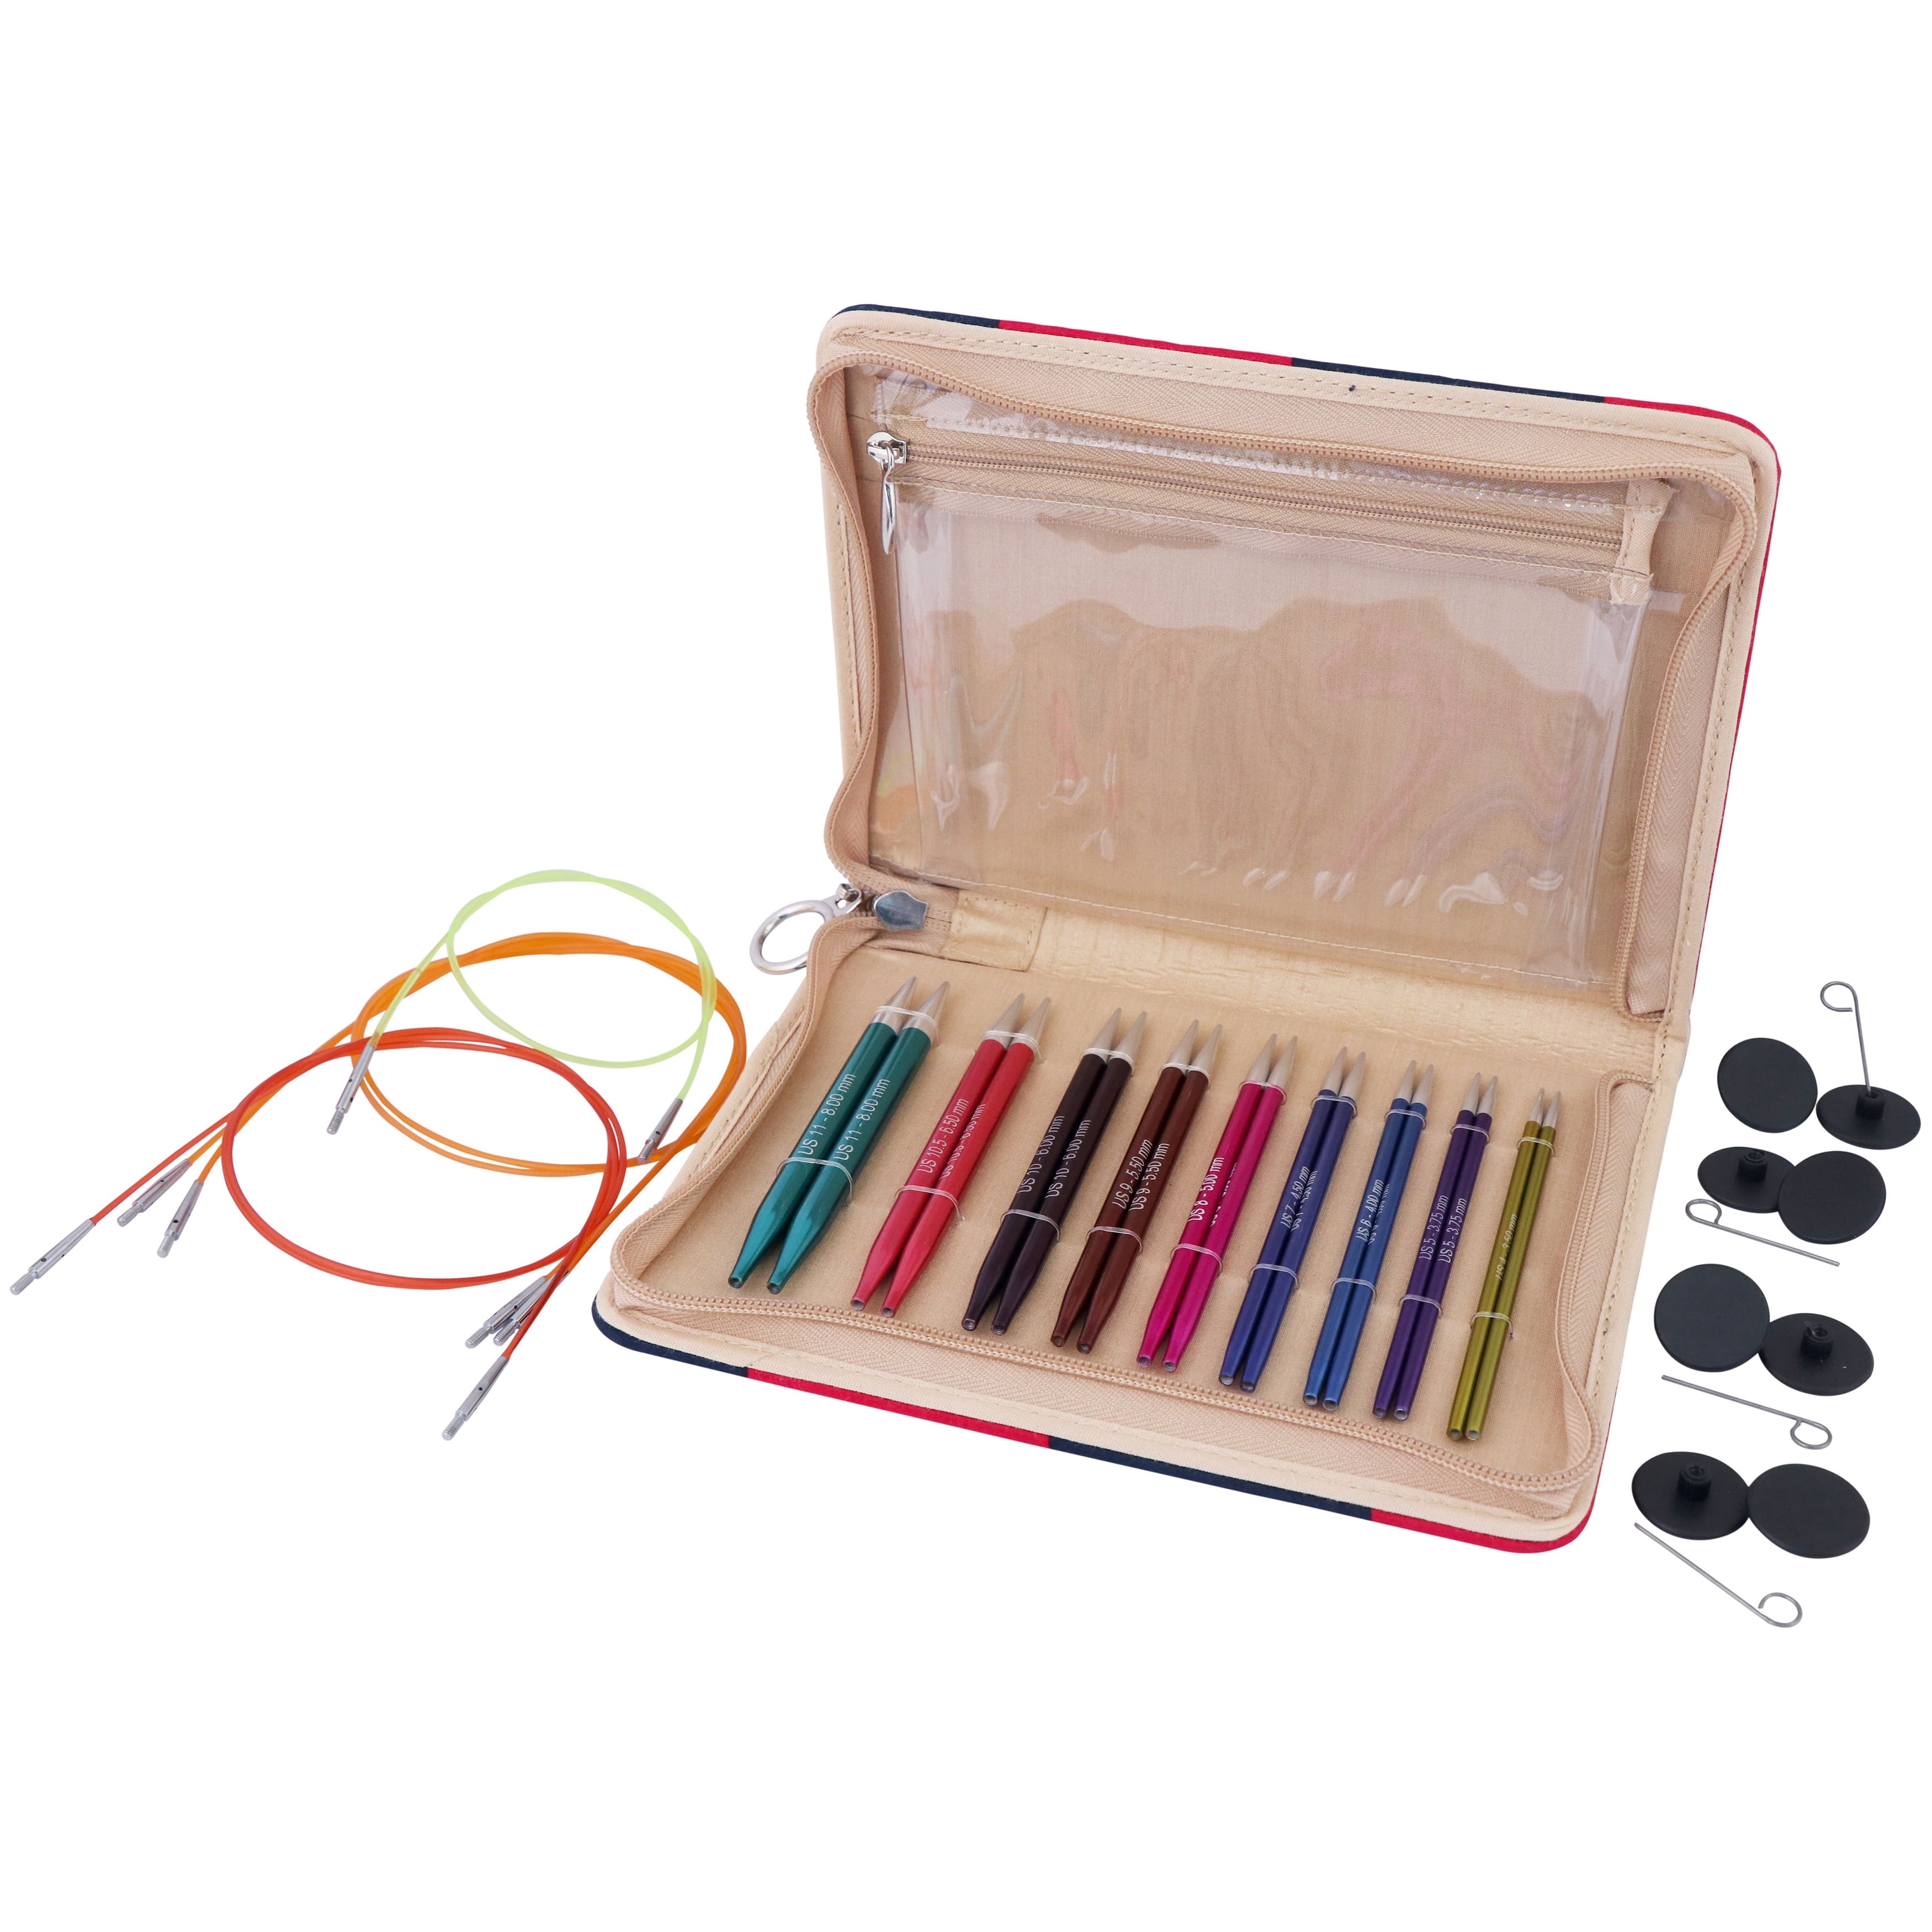  Knitter's Pride Holiday 2022 Day and NITE Interchangeable  Knitting Needles Gift Set Sizes US 4 - US 11